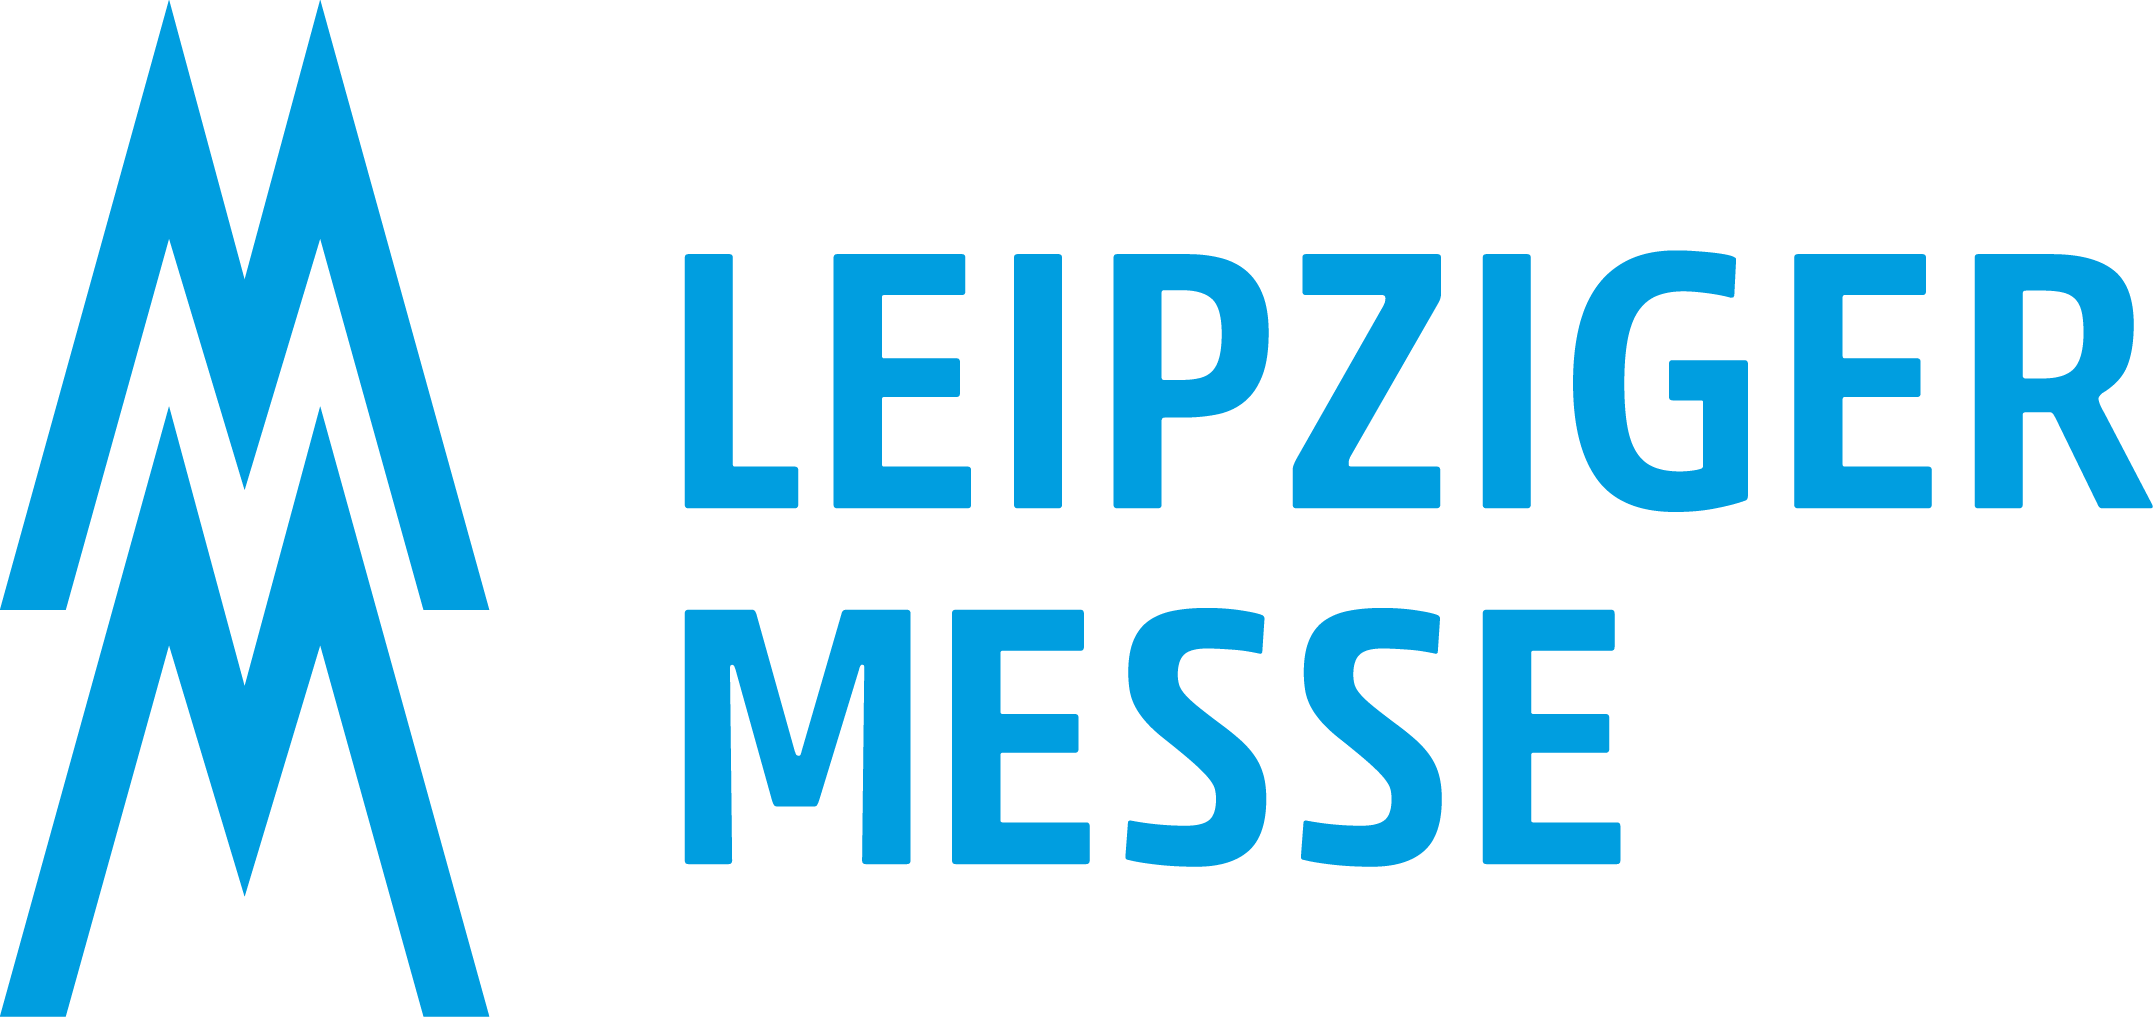 Logo of the Leipziger Messe: Double-M with text Leipziger Messe